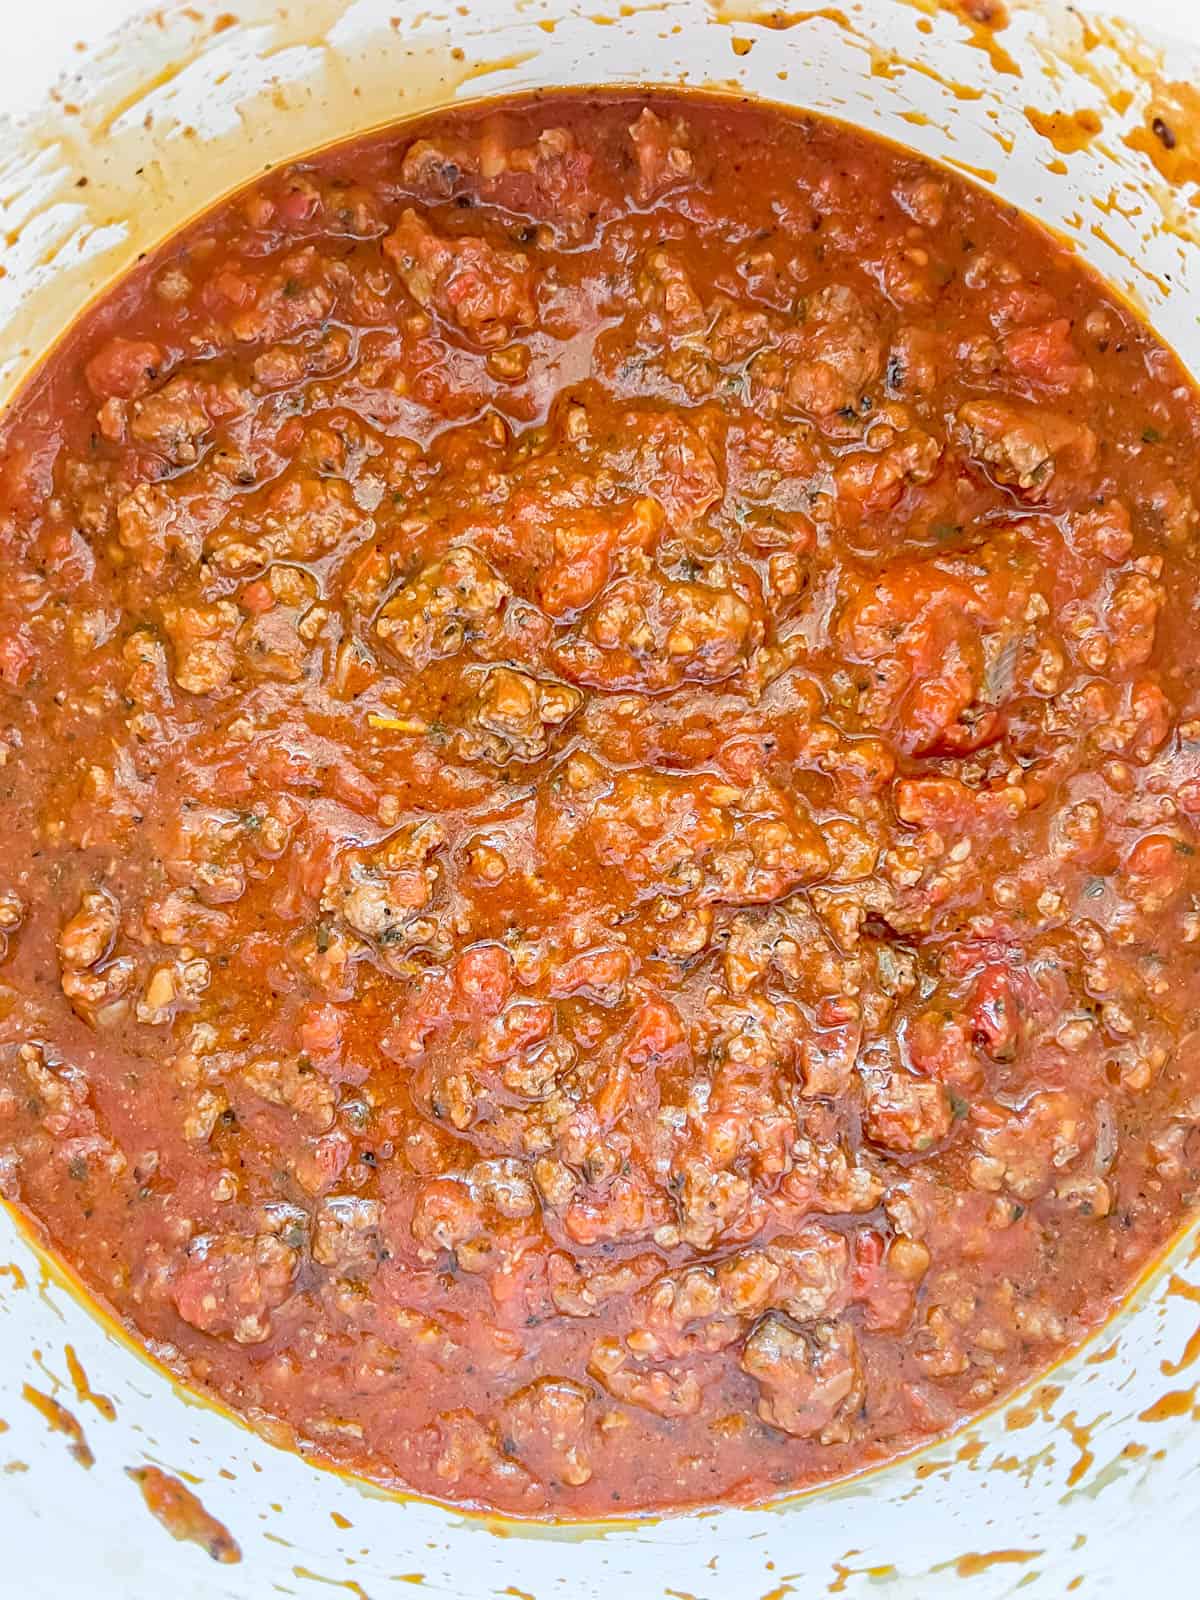 Tomato sauce added to ground beef in a pan.